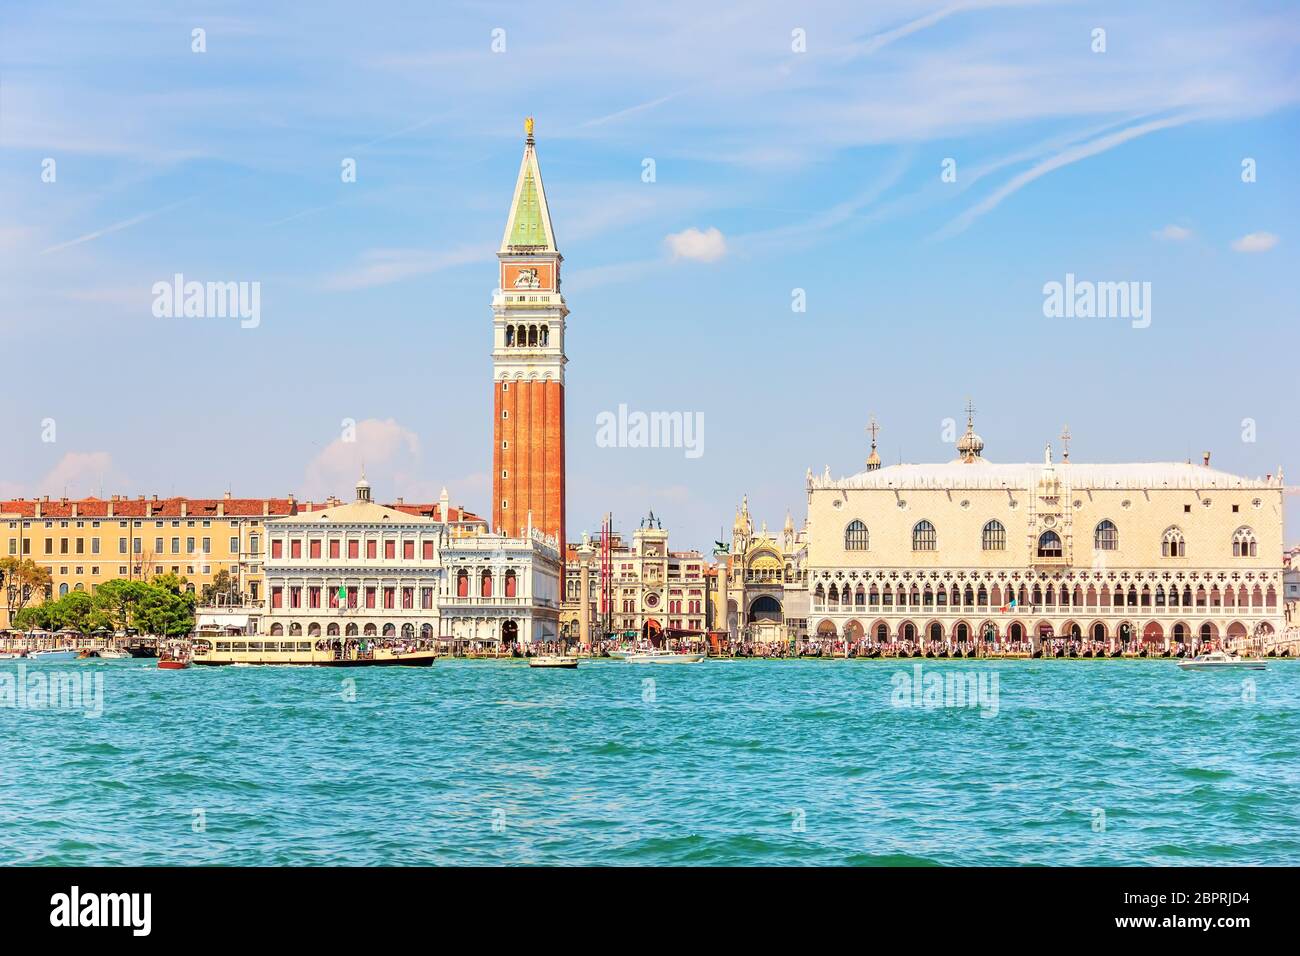 Piazza San Marco and other Venice sights, view from the sea. Stock Photo